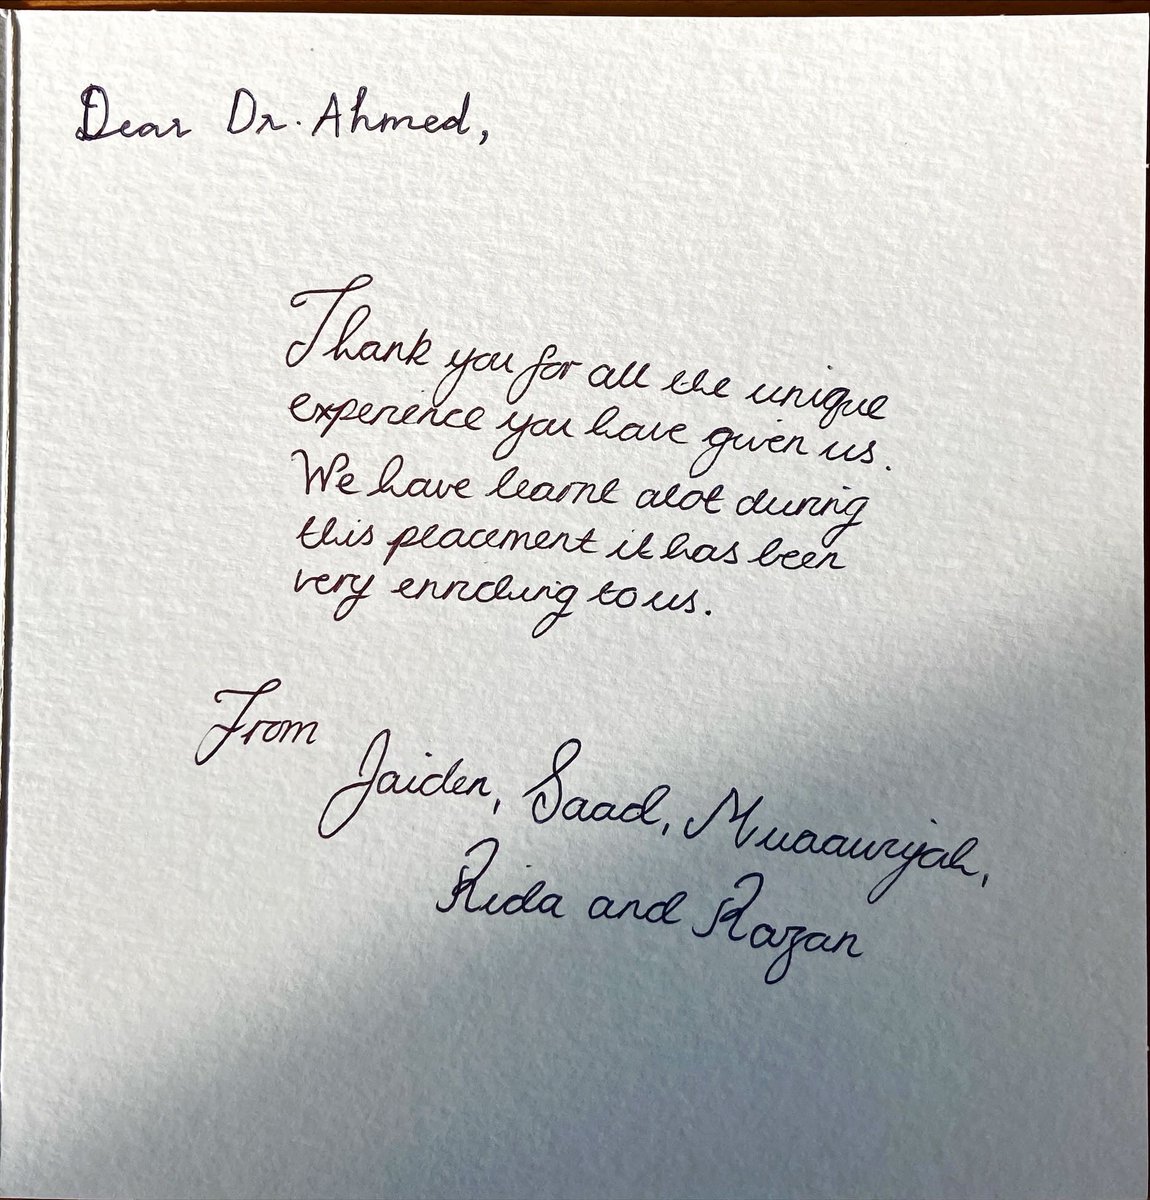 A card from @AstonMedicine students made my day. Reminded my own journey to psychiatry started by inspiring registrar in medical school. @erinpsychdoc @matthewrbroome @you_iqbal @ProfRobHoward @ProfAsifAhmed @SaimaNiaz8 @DrNandiniC @raj_psyc @aluzri1 @geopsychiatry @rcpsychReads